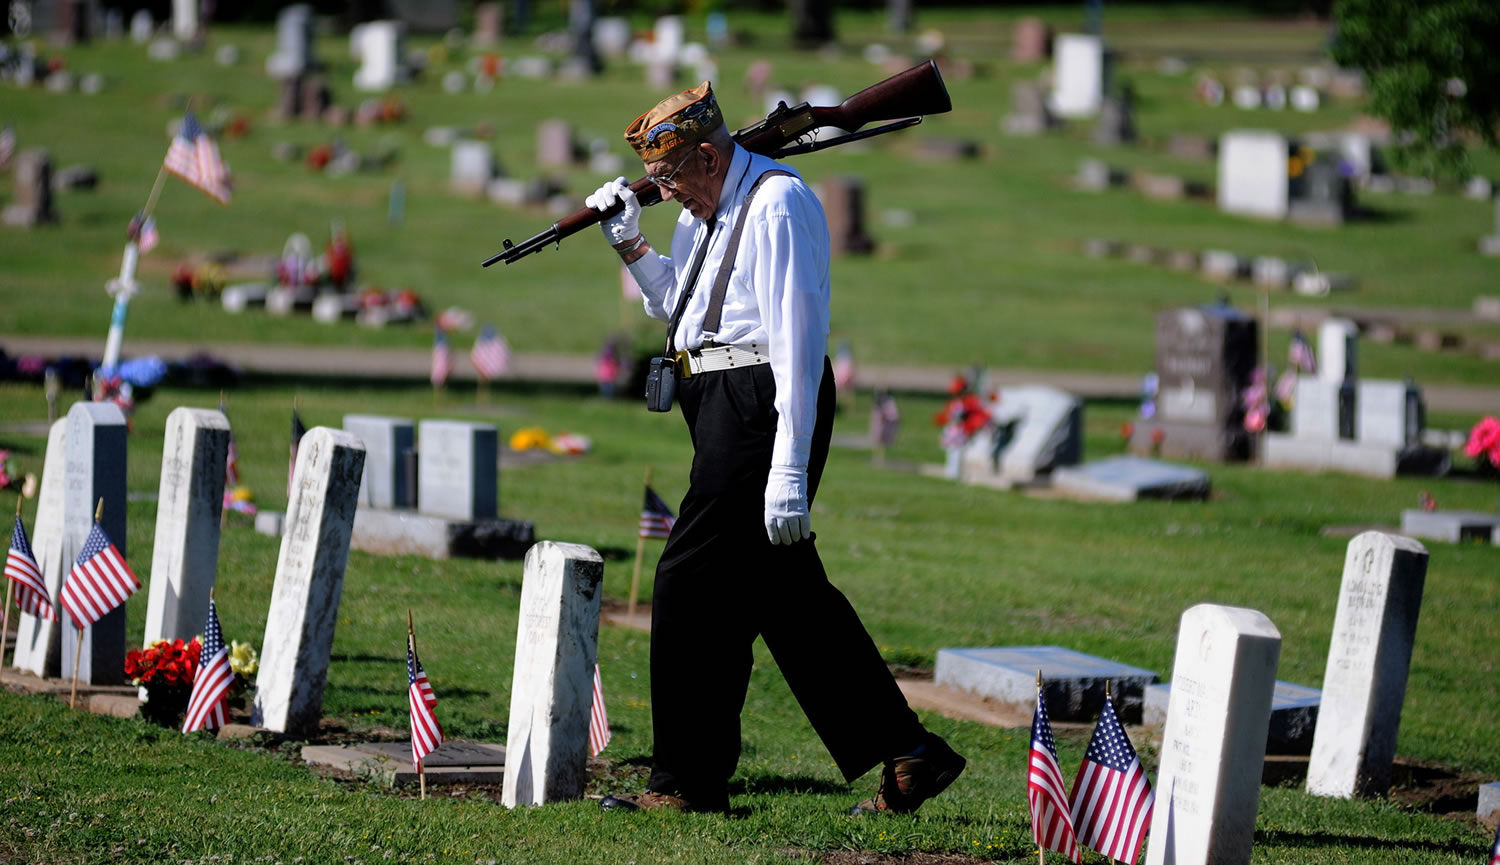 Bill Siebert, of Salina, a member of the VFW Post 1432 Firing Squad, walks through Gypsum Hill Cemetery to join his squad Monday in Salina, Kan.